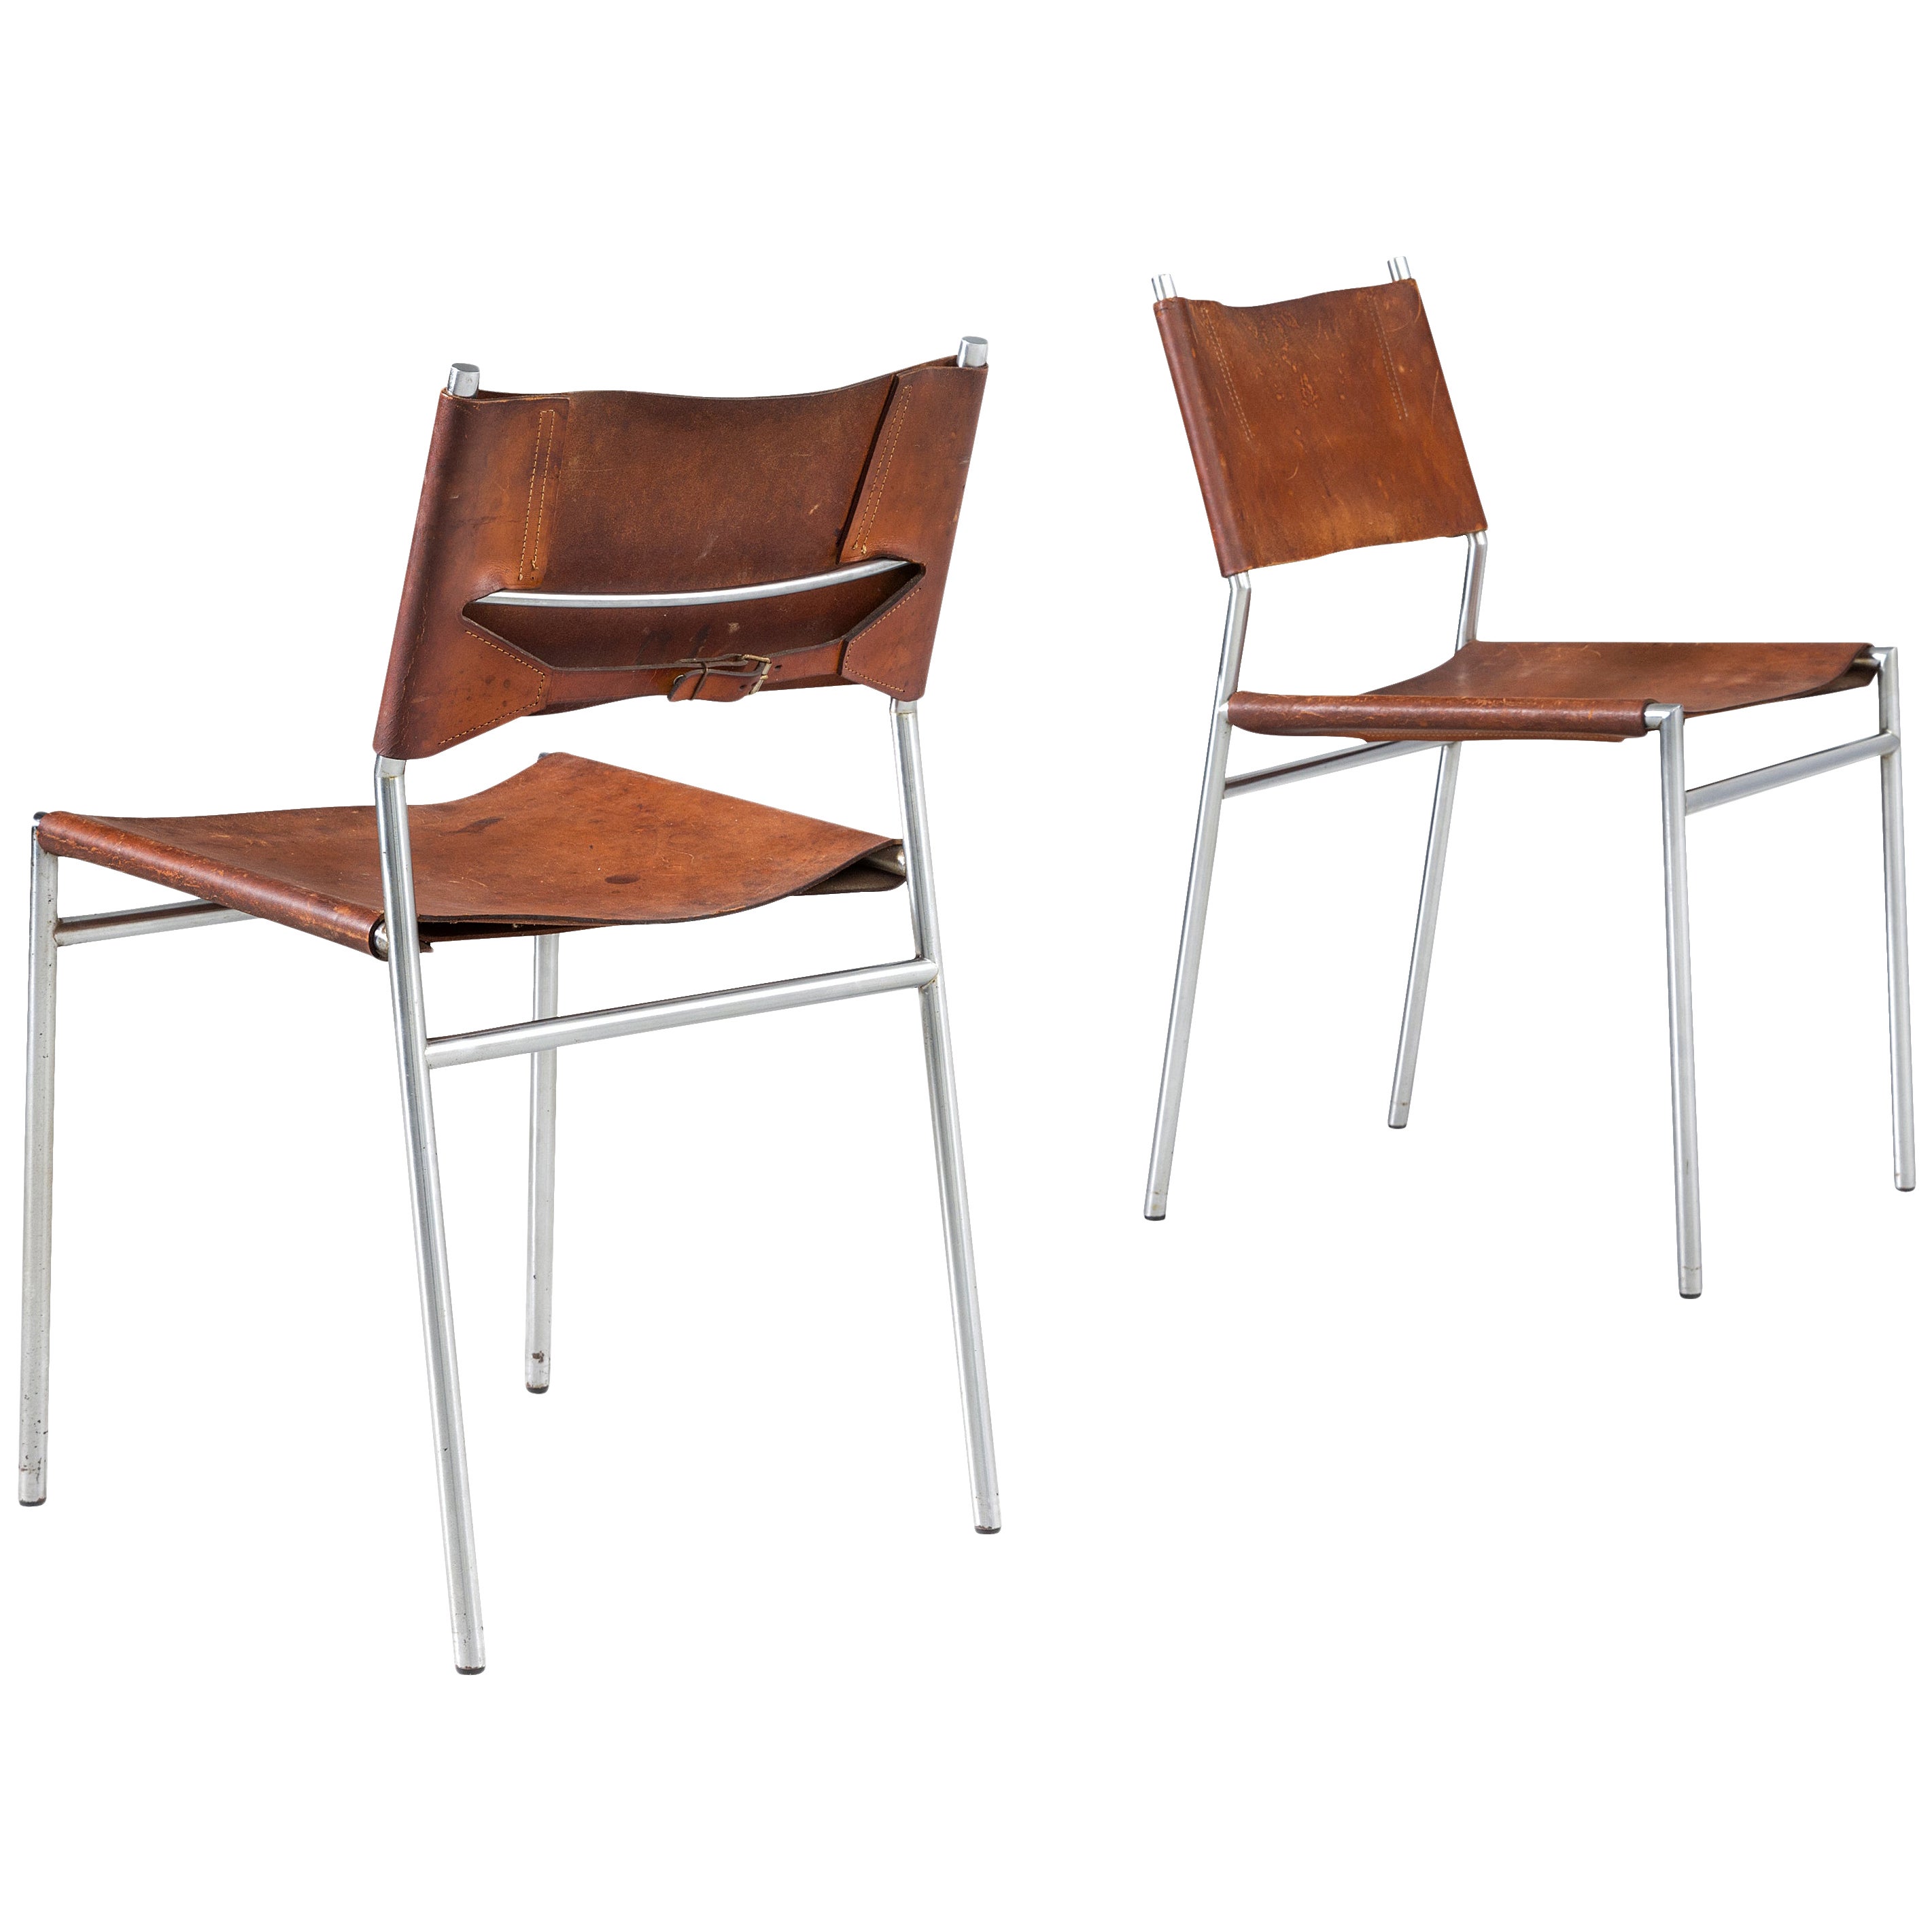 Martin Visser for 't Spectrum Pair of Dining Chairs in Cognac Leather